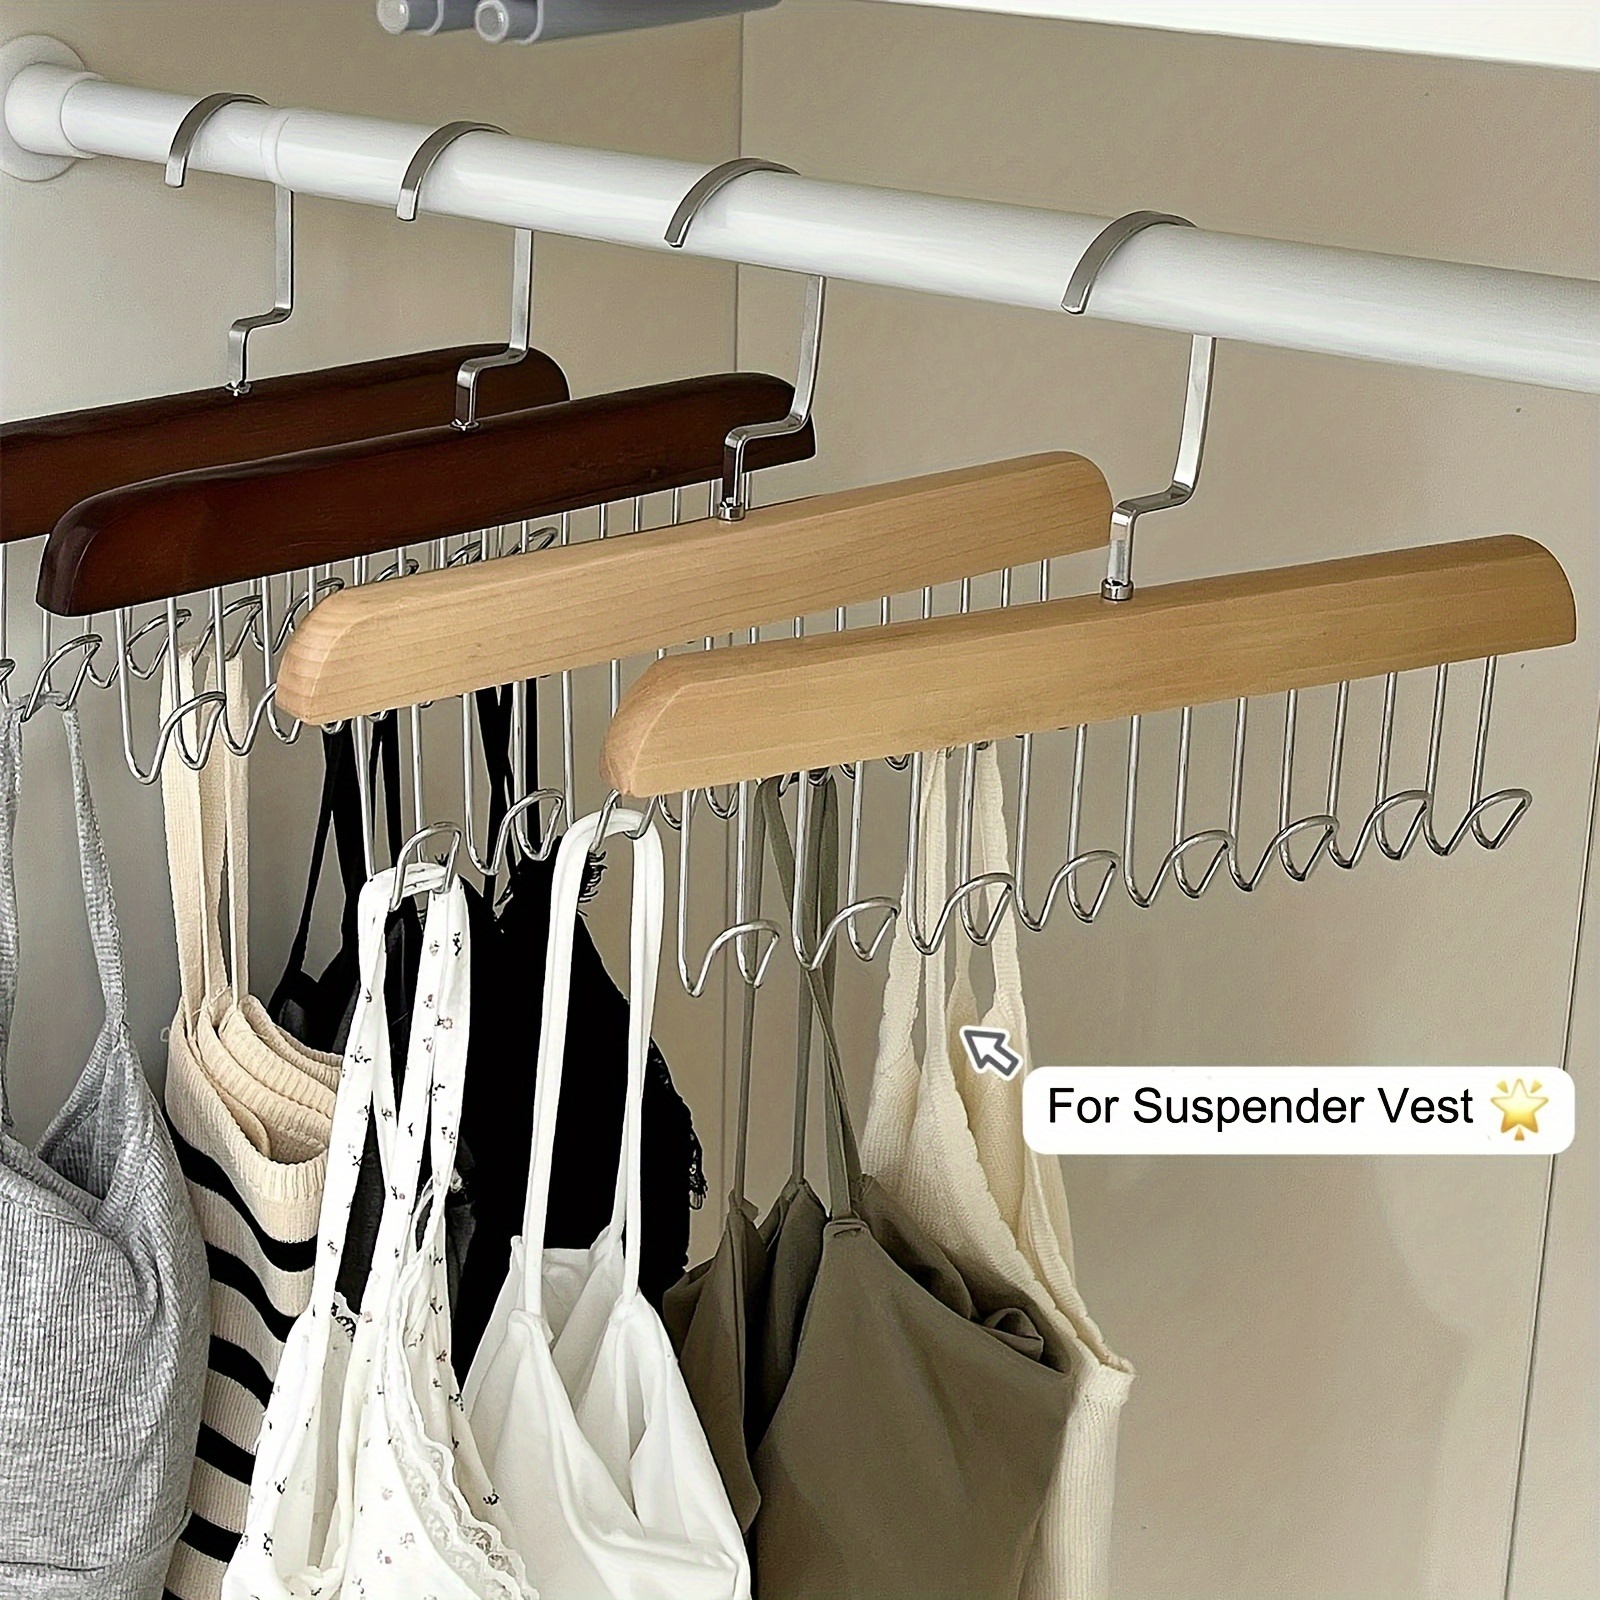  2 Pieces Space Saving Bra Organizer with Wood Tank Top Hanger  Closet Organizer Hangers Natural Wood Bra Holder Hanger Closet Organizer  and Storage Rack for Bras, Tank Tops, Camisoles : Home